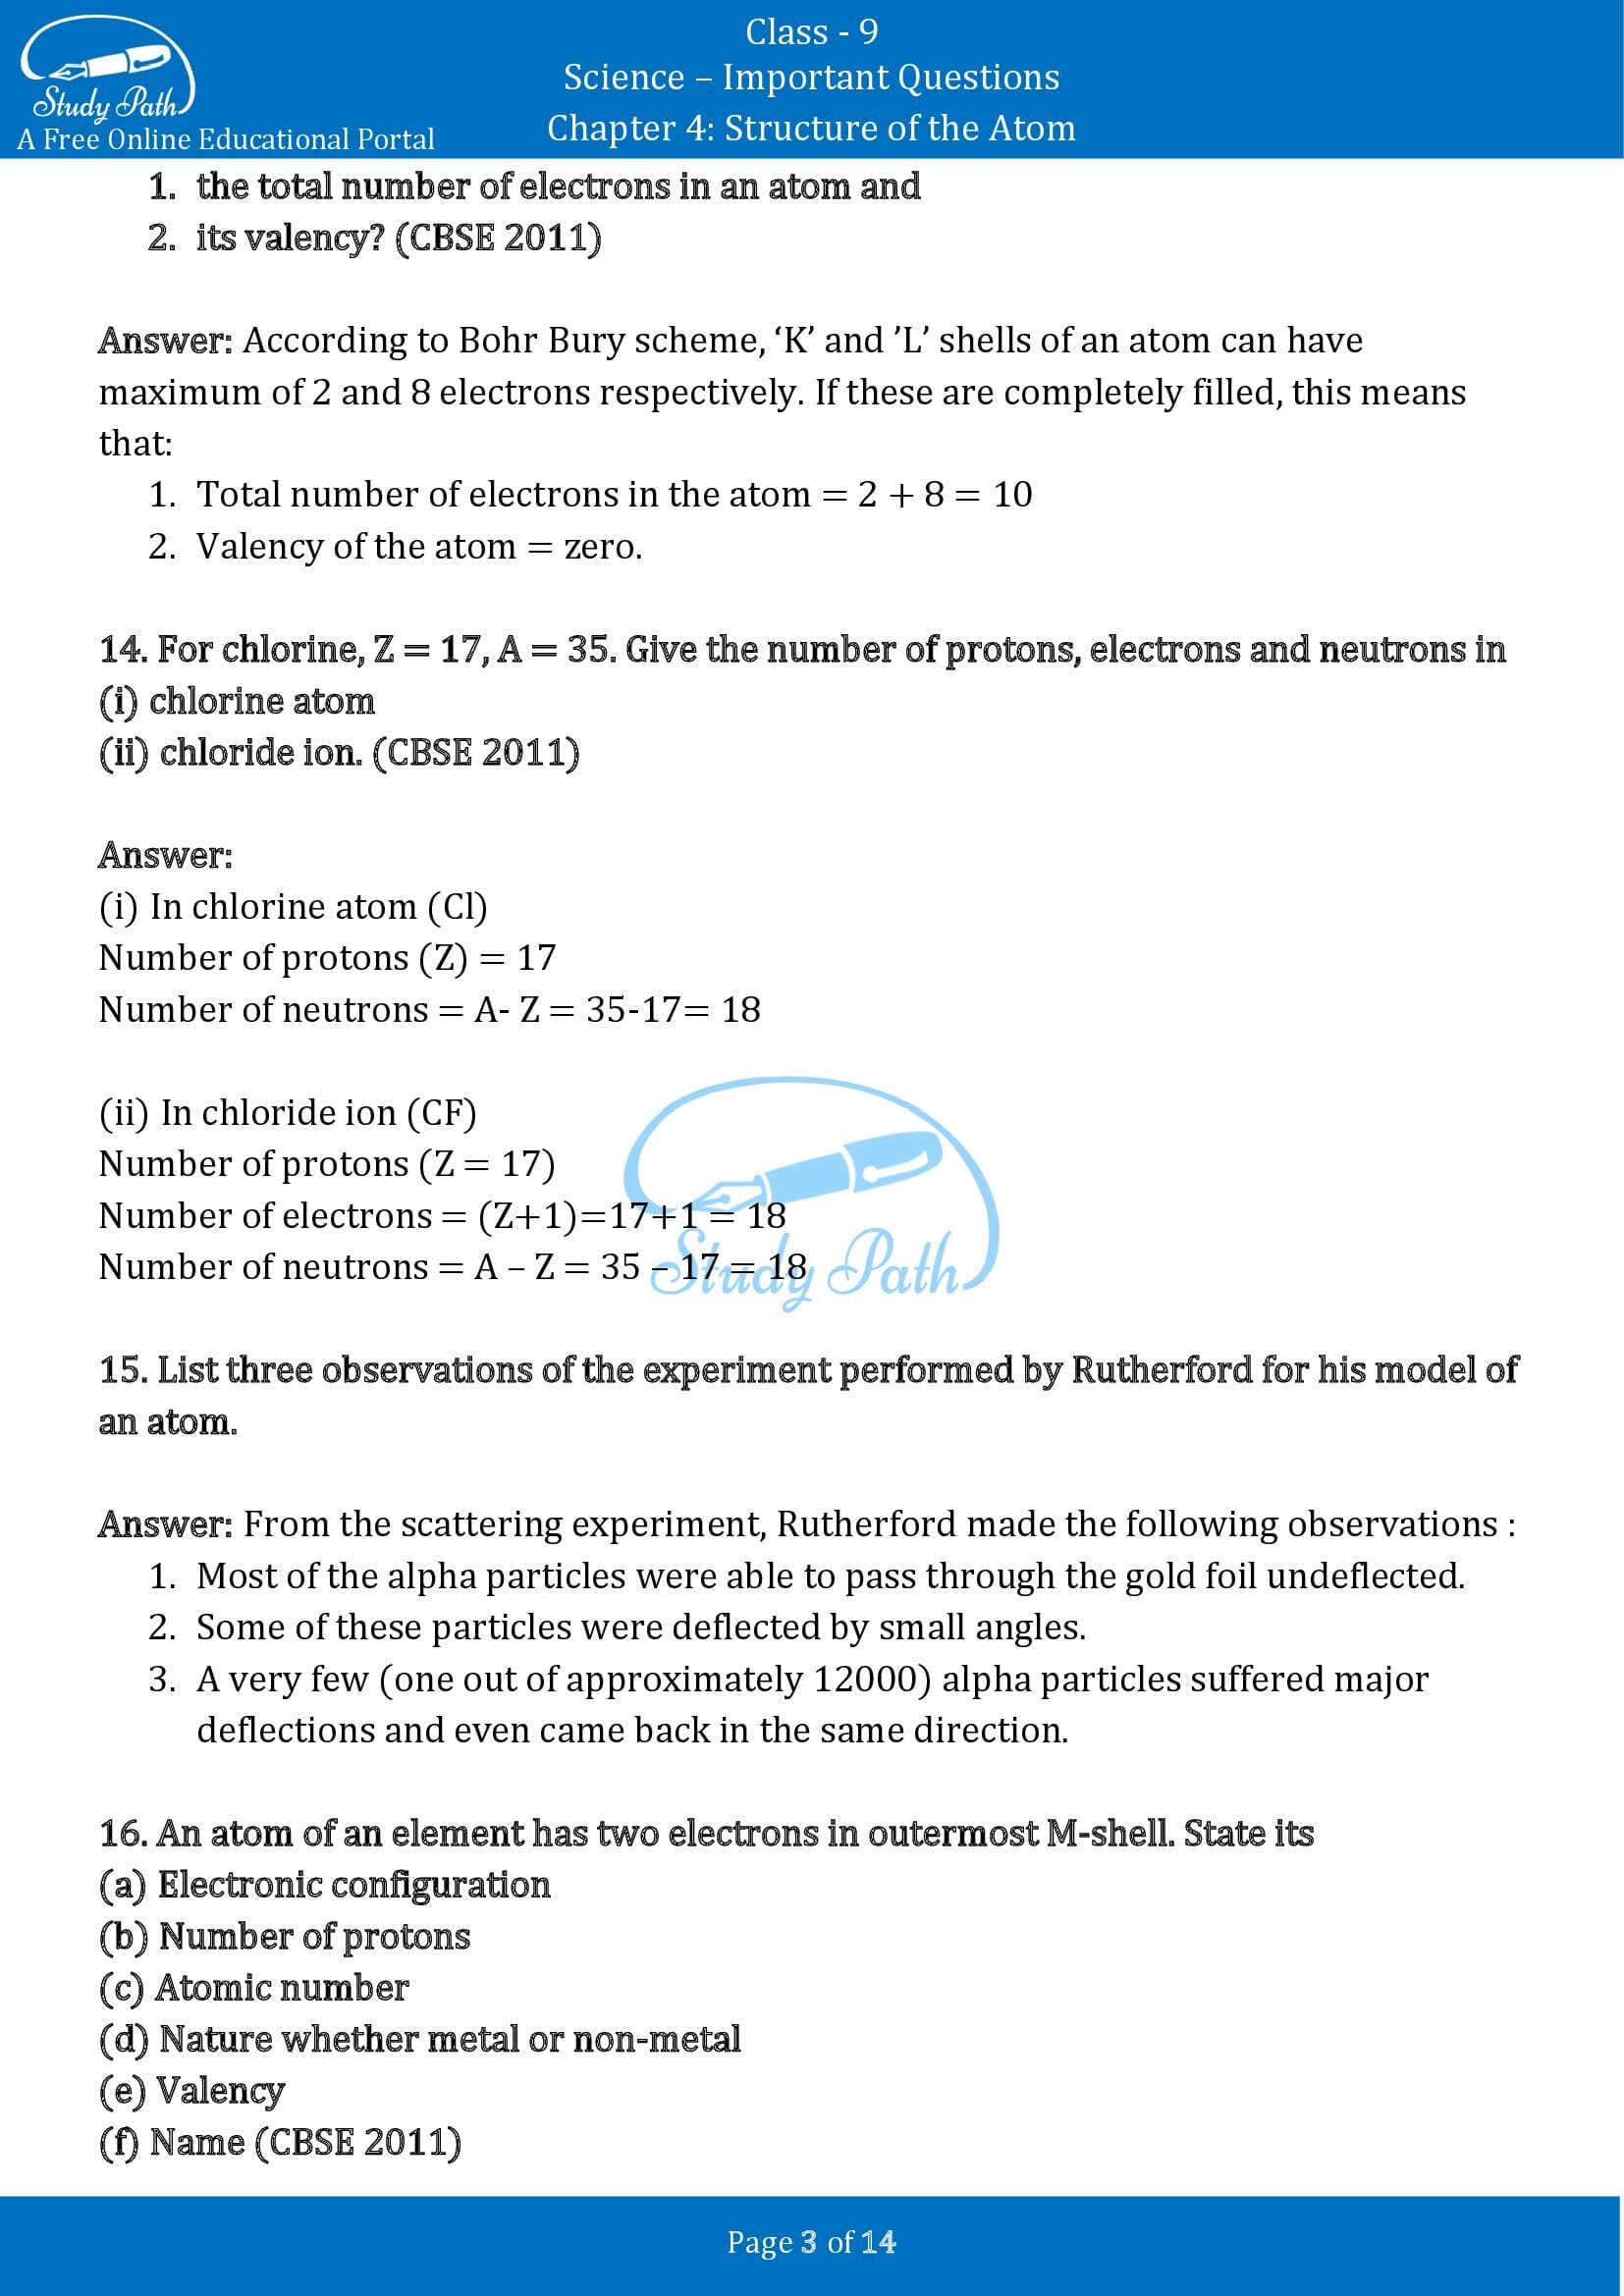 Important Questions for Class 9 Science Chapter 4 Structure of the Atom 00003